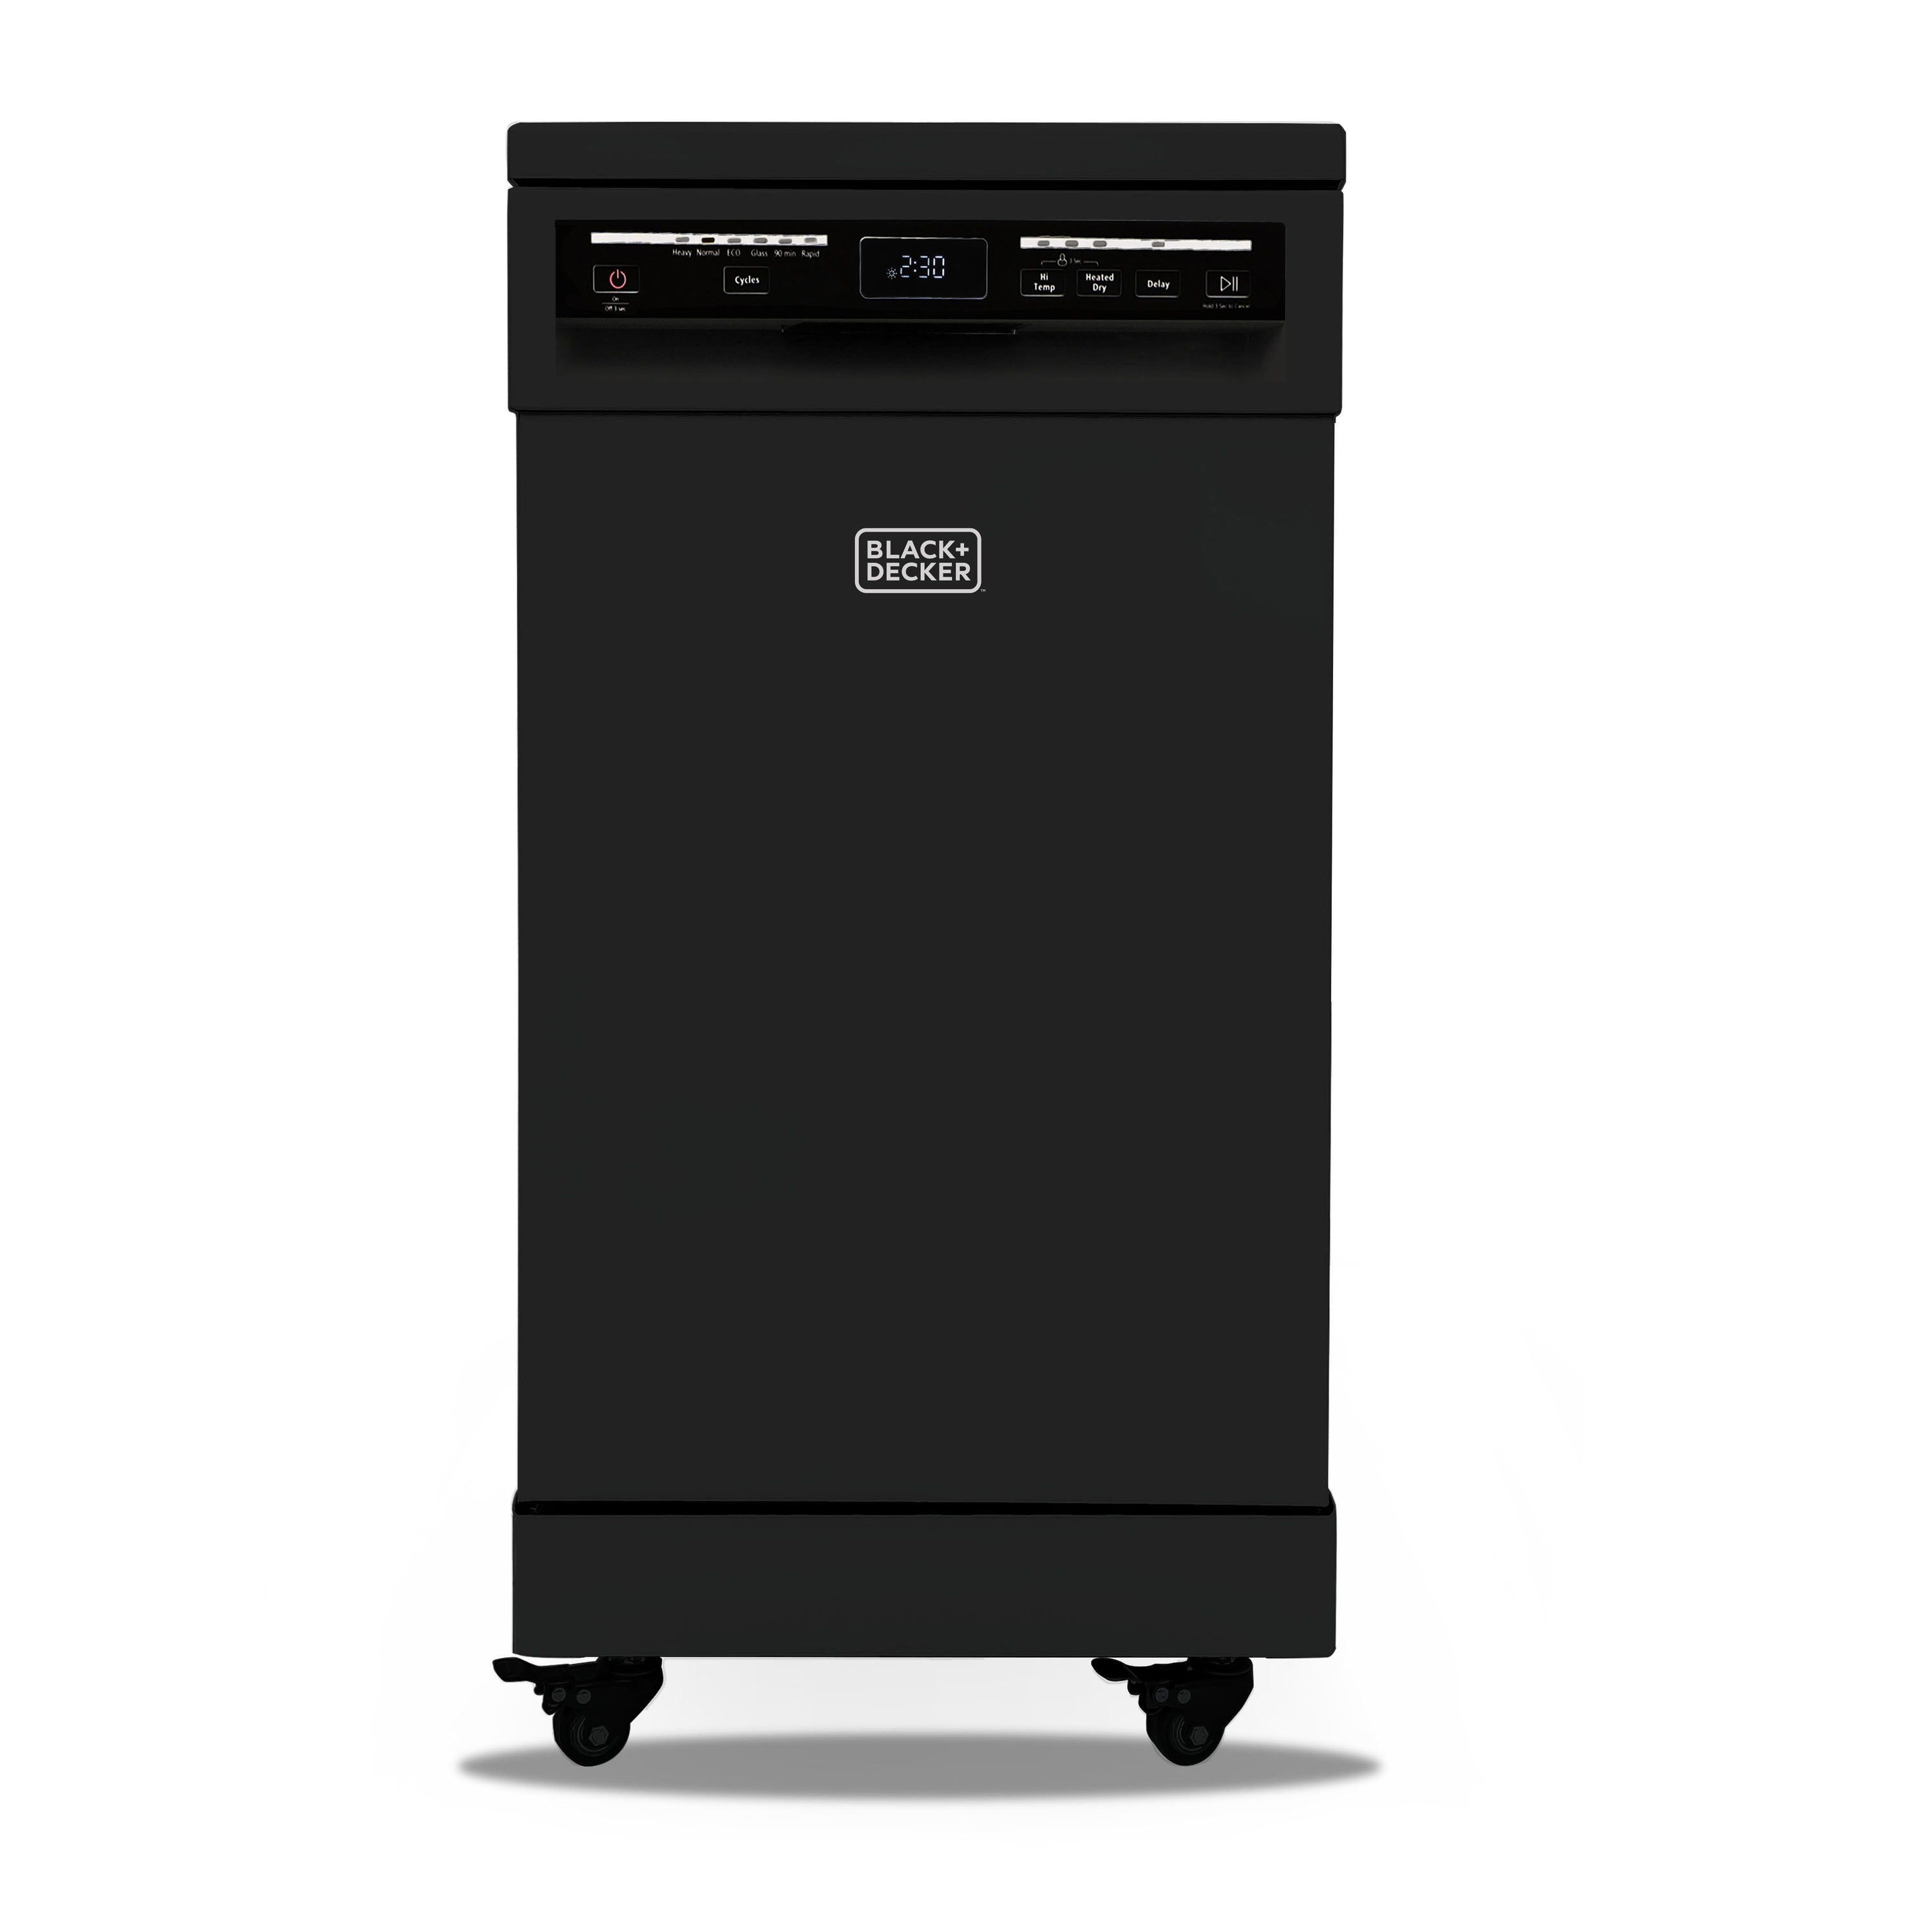 Black+decker compact countertop Dishwasher - appliances - by owner